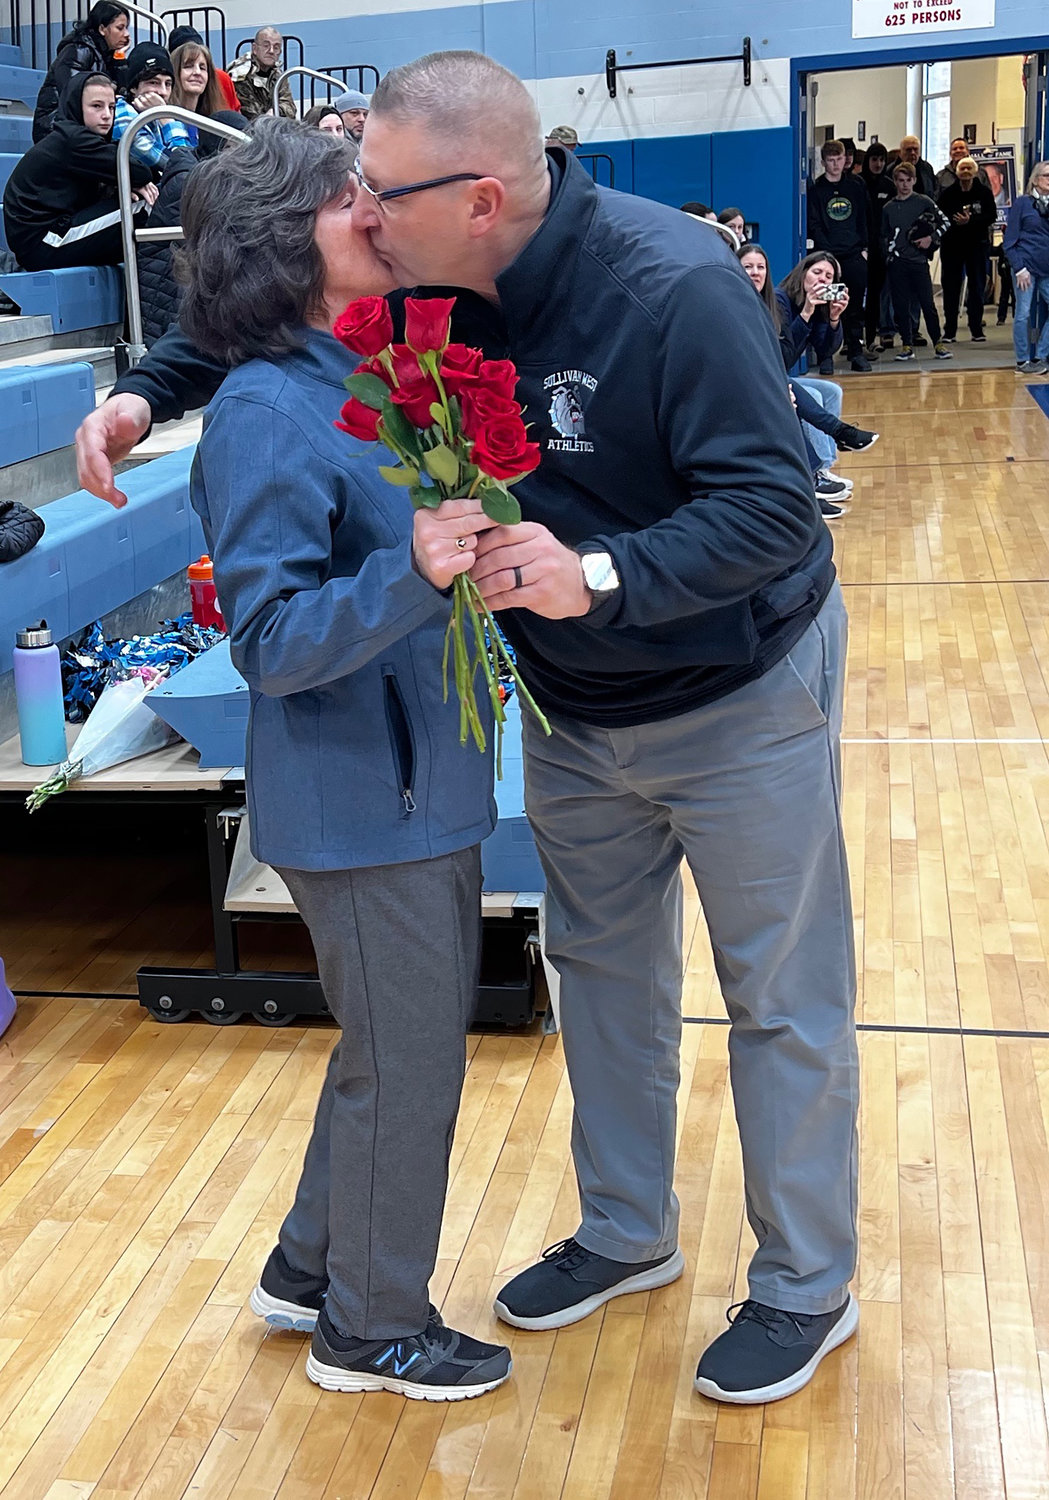 Sullivan West boys basketball coach John Meyer gives Becky Ahart a hug along with flowers prior to the game versus Monticello. Meyer, along with Roscoe/LM Athletic Director David Eggleton, Monticello boys basketball coach Chris Russo and Sullivan West Assistant Basketball Coach Jerry Davitt spoke glowingly about Fred Ahart and the remarkable influence he had on so many during his illustrious career.